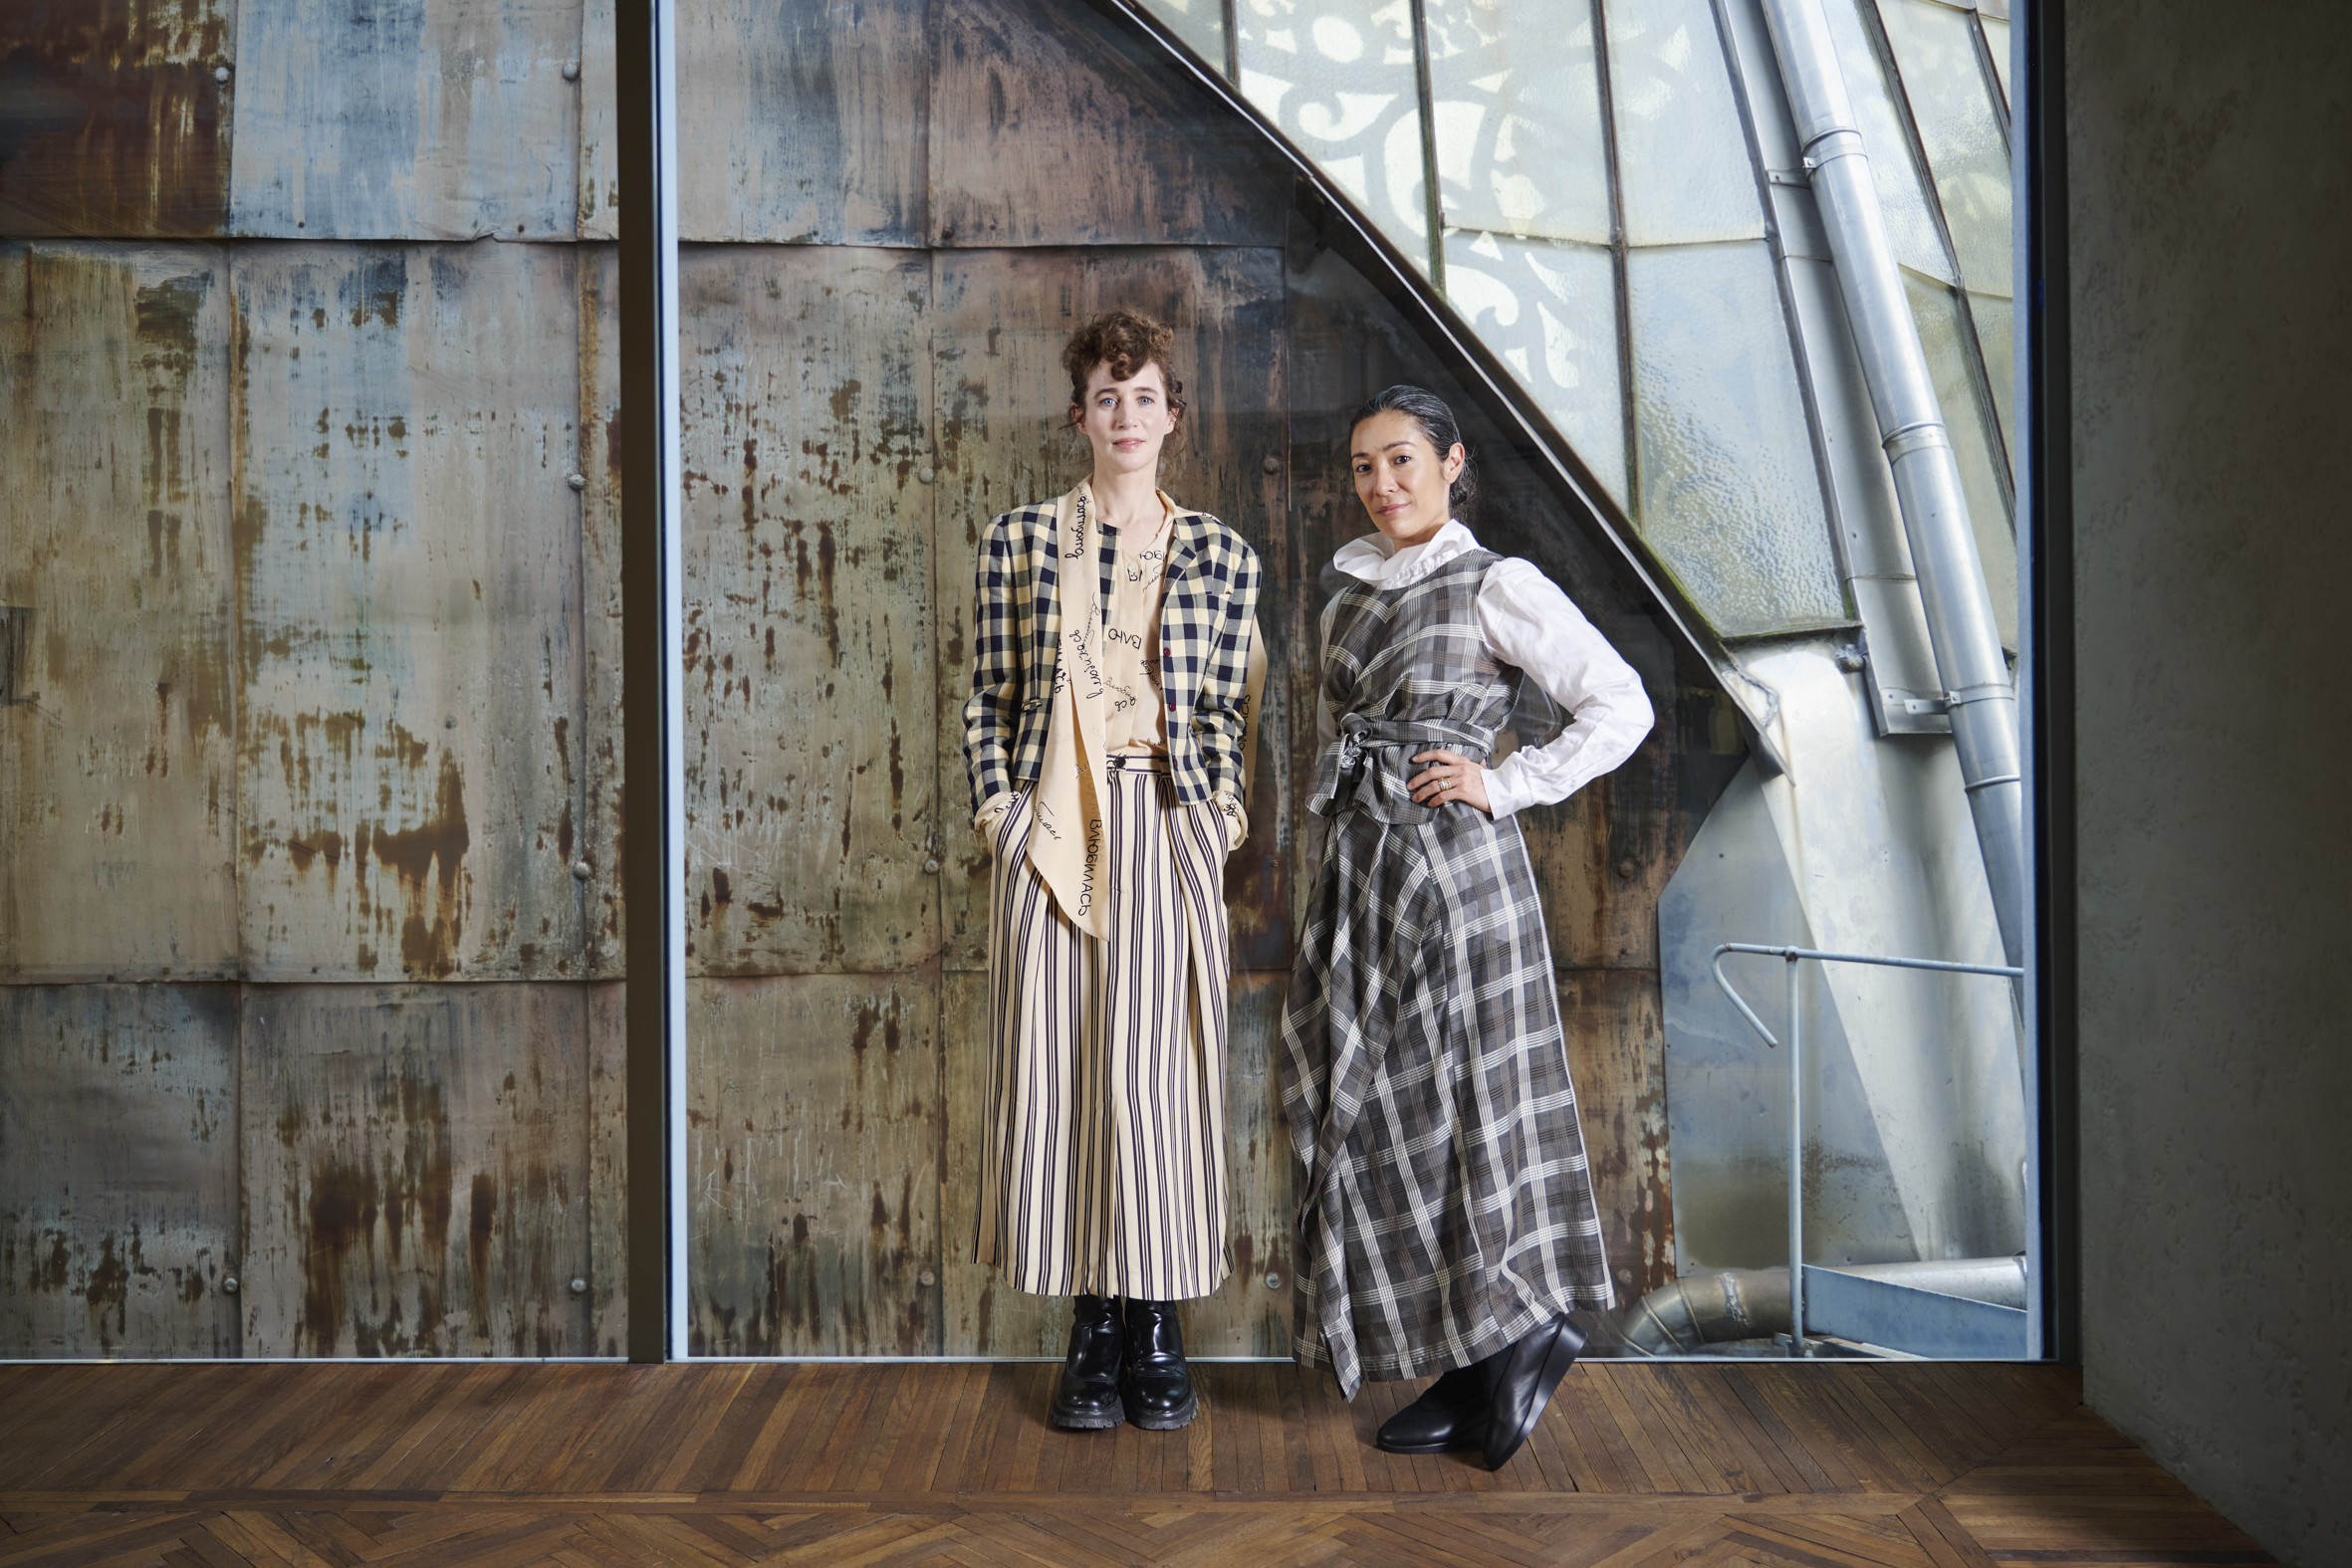 Miranda July and Mia Locks in chic, patterned outfits stand confidently in front of a rustic metal backdrop with an industrial vibe, complementing the strong, artistic atmosphere of the setting.